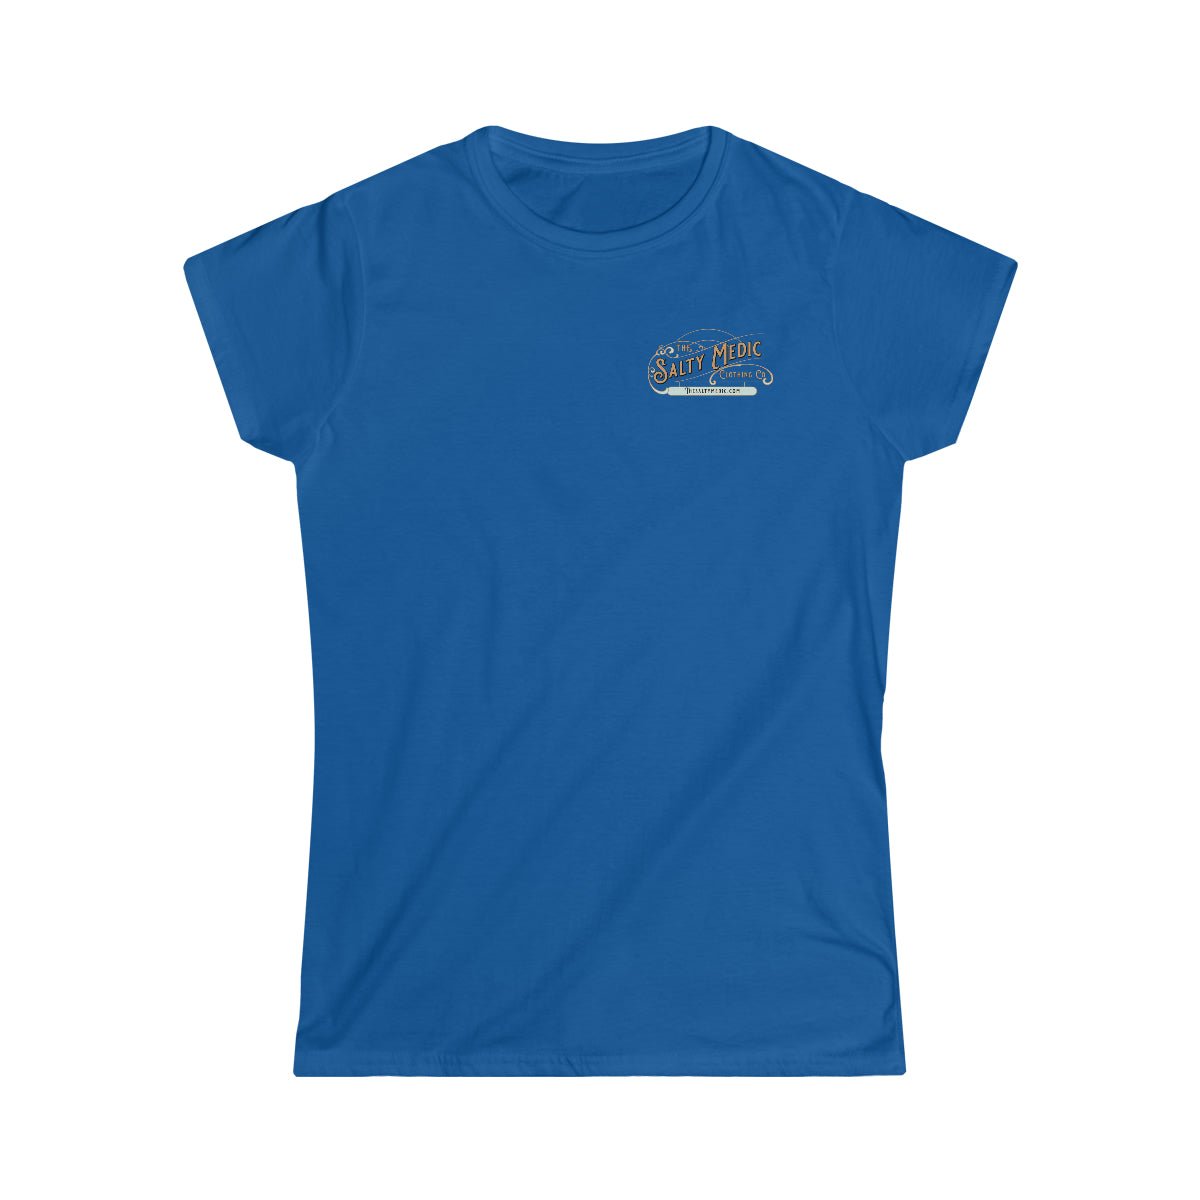 Salty Medic Logo Women's Softstyle Tee - Salty Medic Clothing Co.